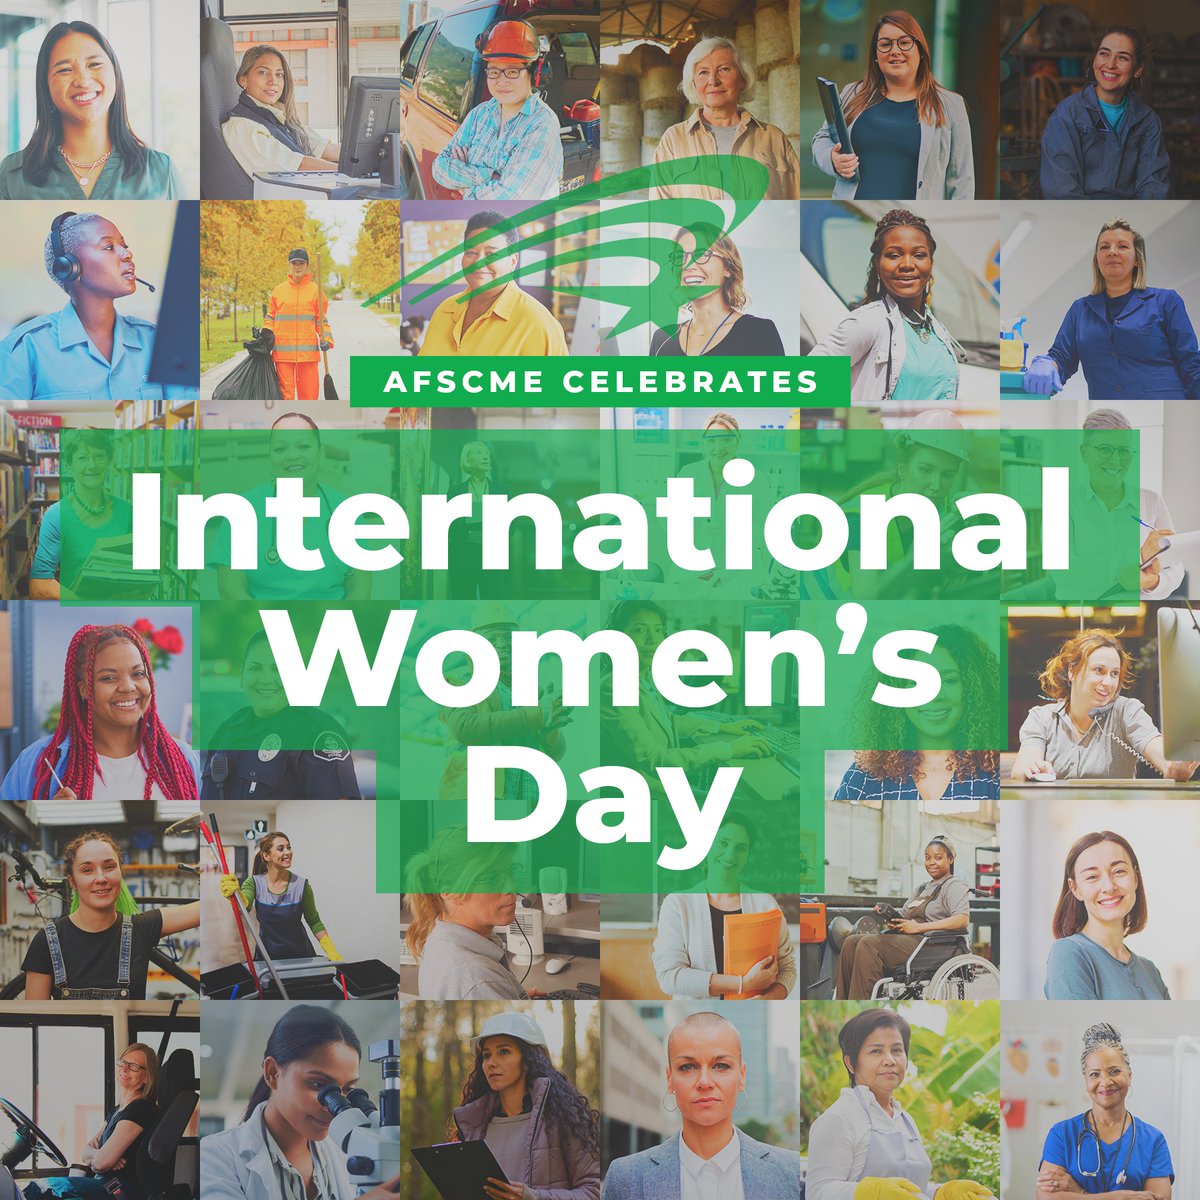 On International Women’s Day, we honor all of the remarkable AFSCME women whose strength and dedication make our union so strong.